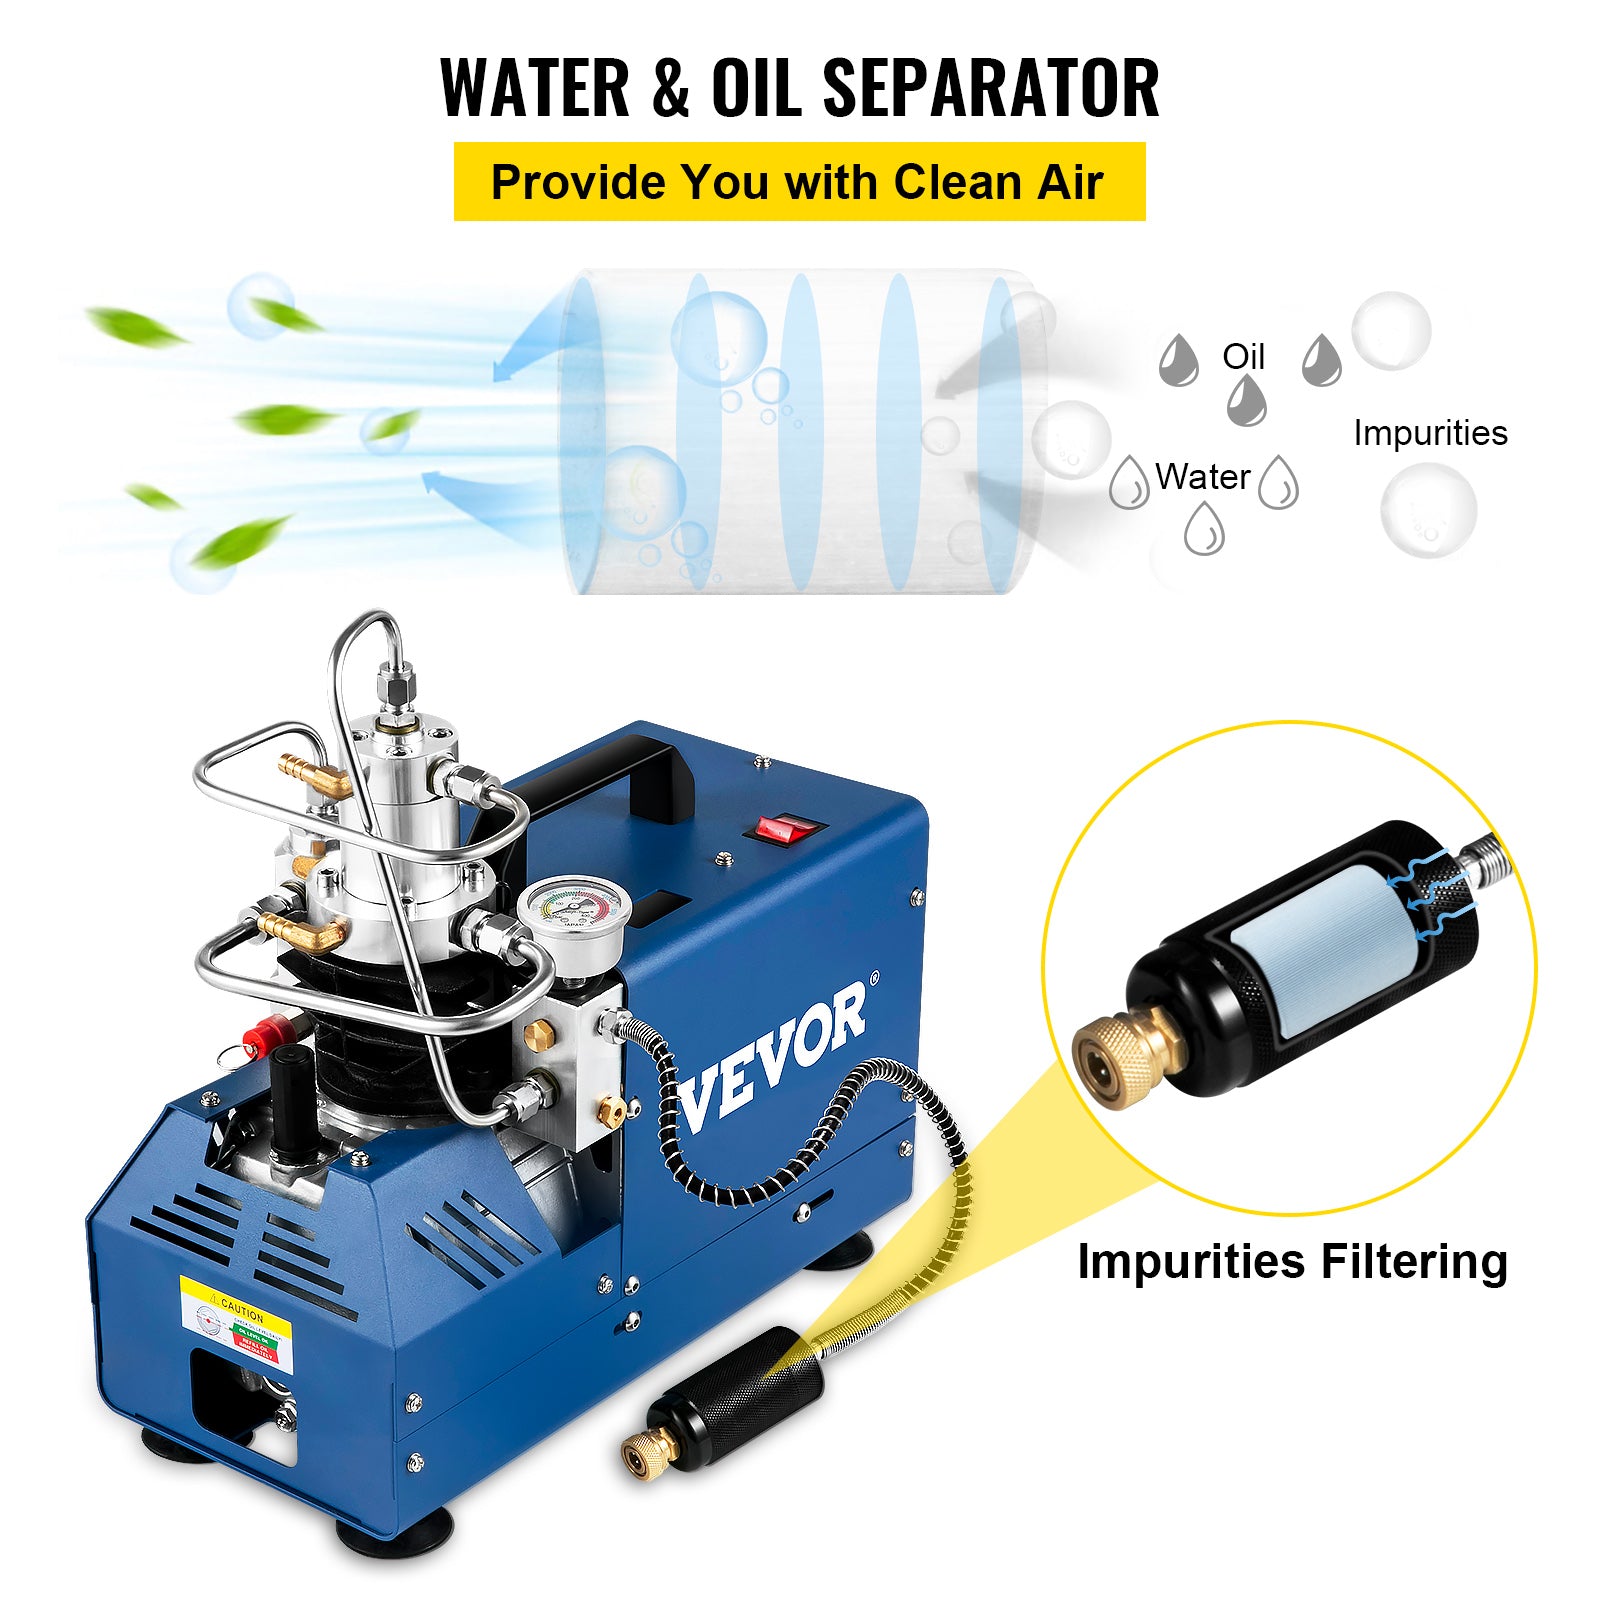 High Pressure PCP Air Compressor Pump, 4500PSI, Oil/Water Separator, Water Cooling System